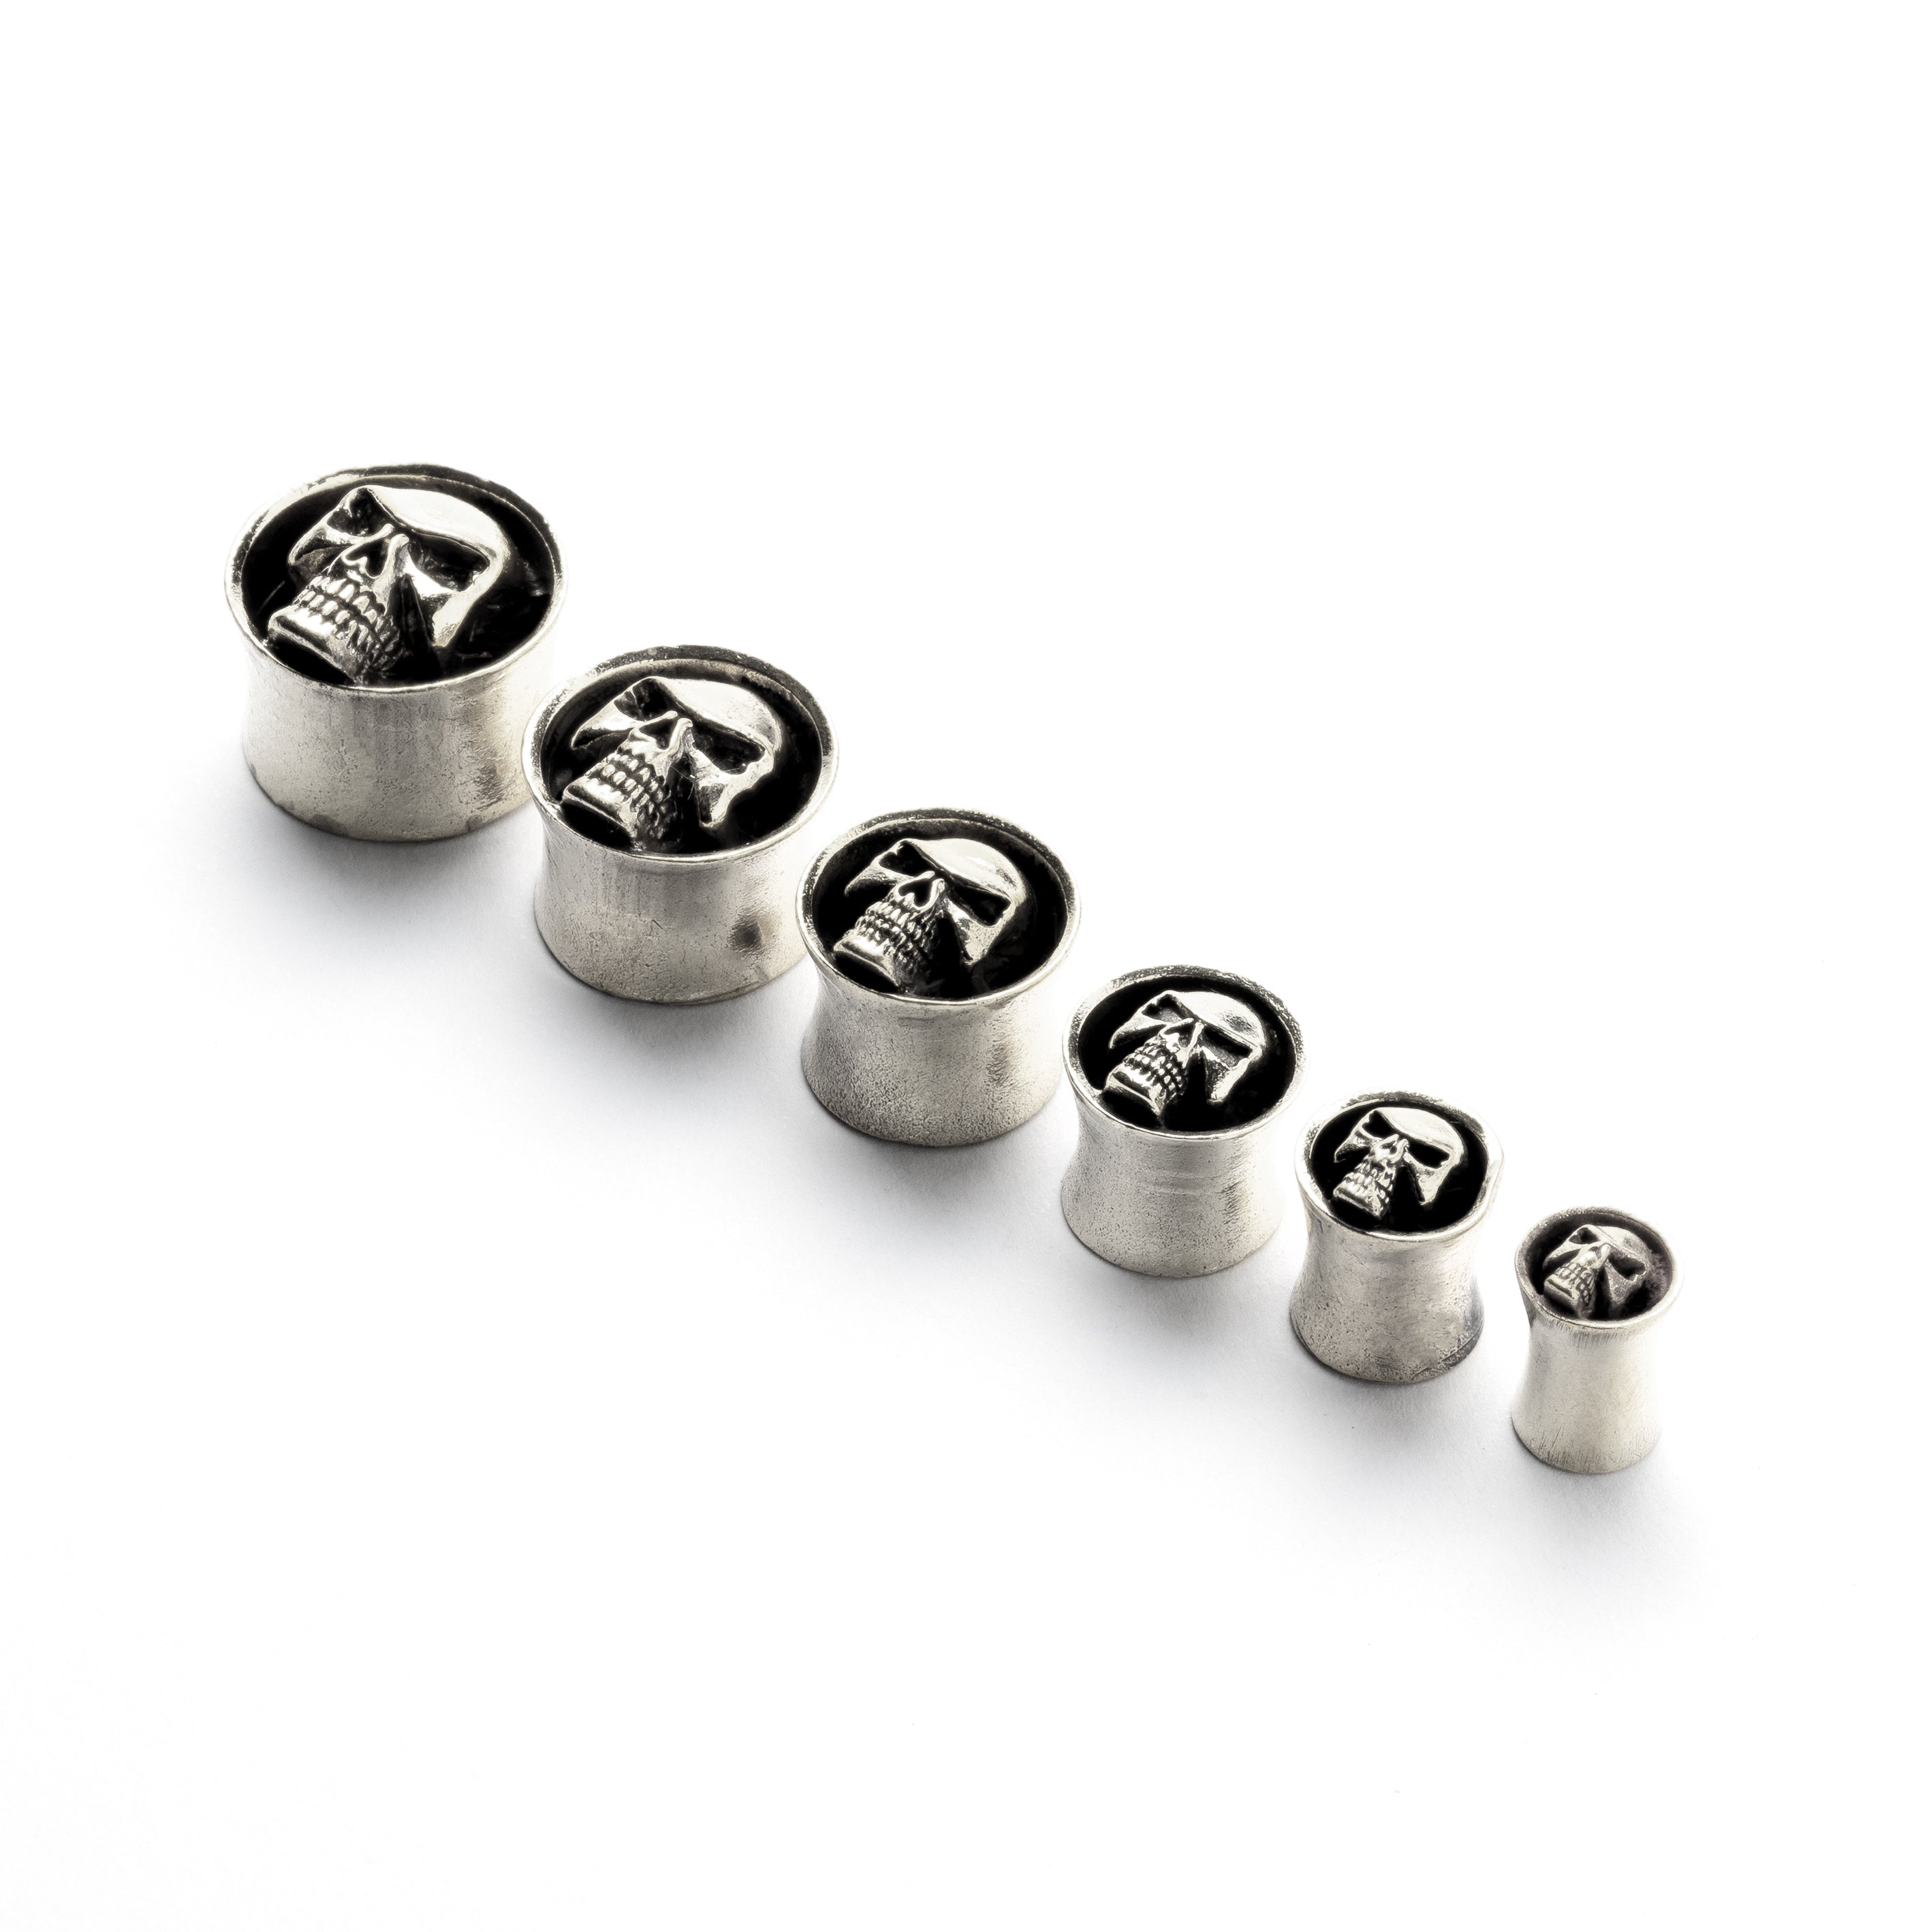 White brass skull ear plugs front view